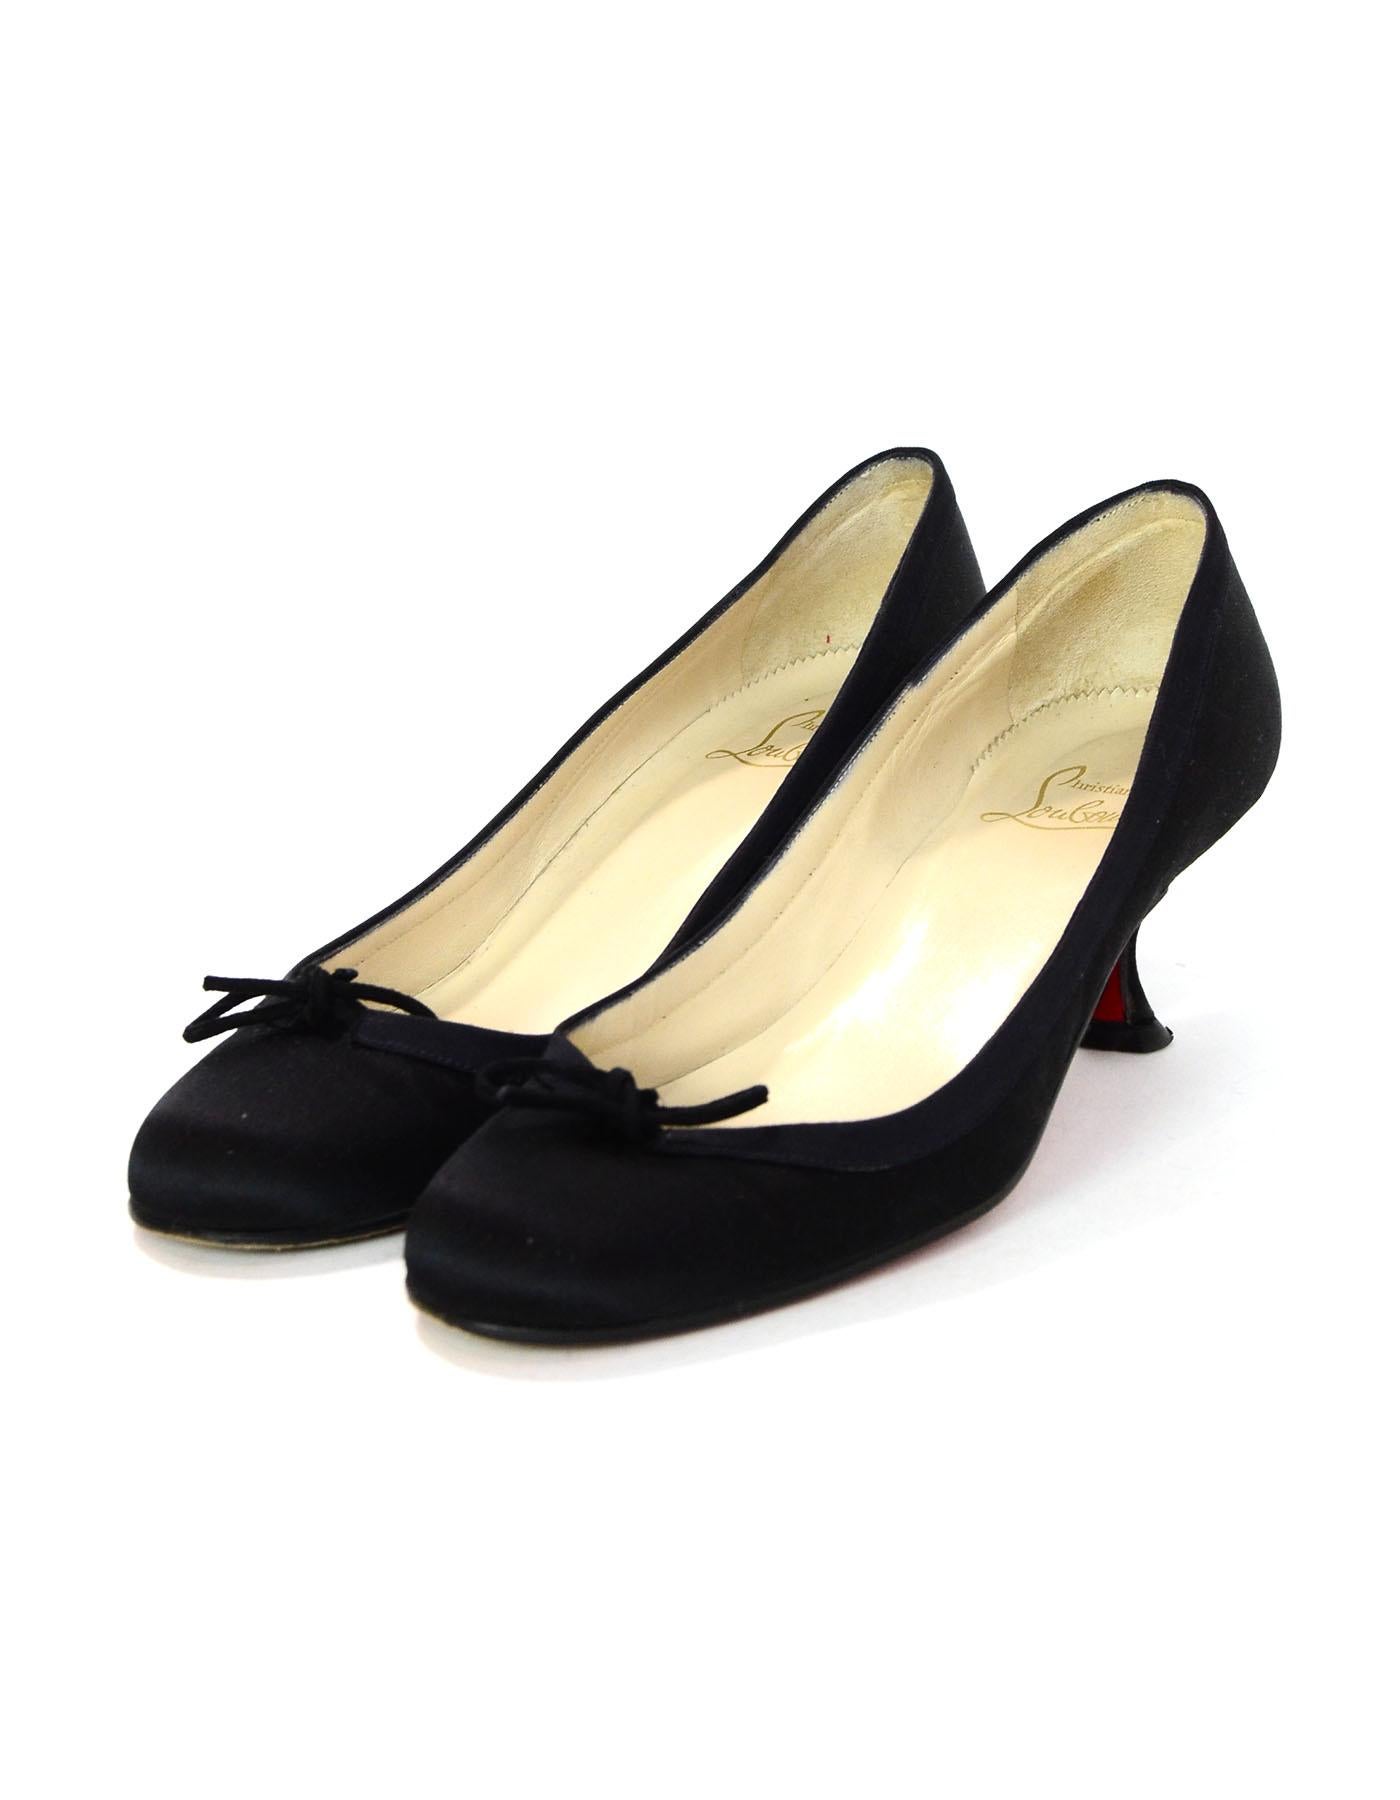 Christian Louboutin Black Satin Kitten Heels Sz 39.5

Made In: Italy
Color: Black
Materials: Satin
Closure/Opening: Slide on
Sole Stamp: Christian Louboutin made in Italy 39.5
Overall Condition: Very good pre-owned condition with the exception of